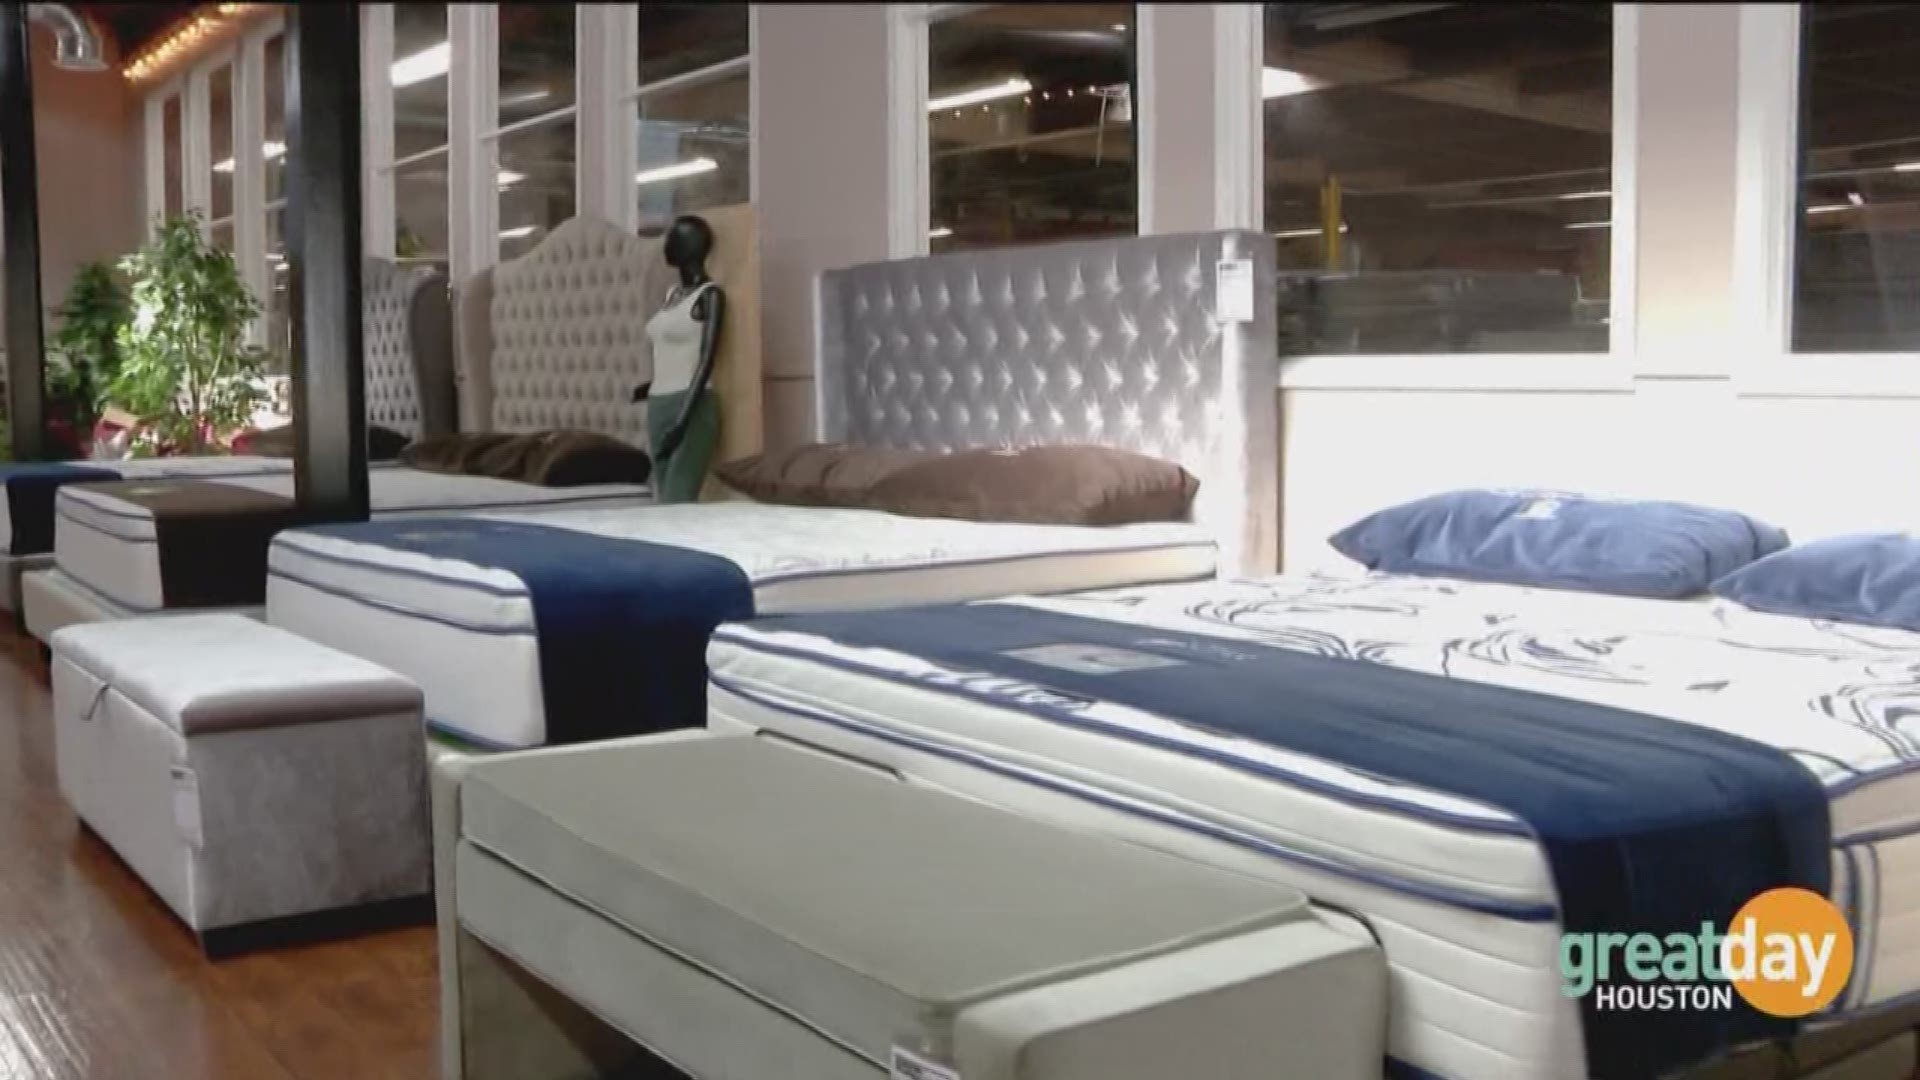 Start 2019 rested and recharged!  Owner of Texas Mattress Makers Youval Meicler explains the secret to finding a mattress that fits your sleep style.